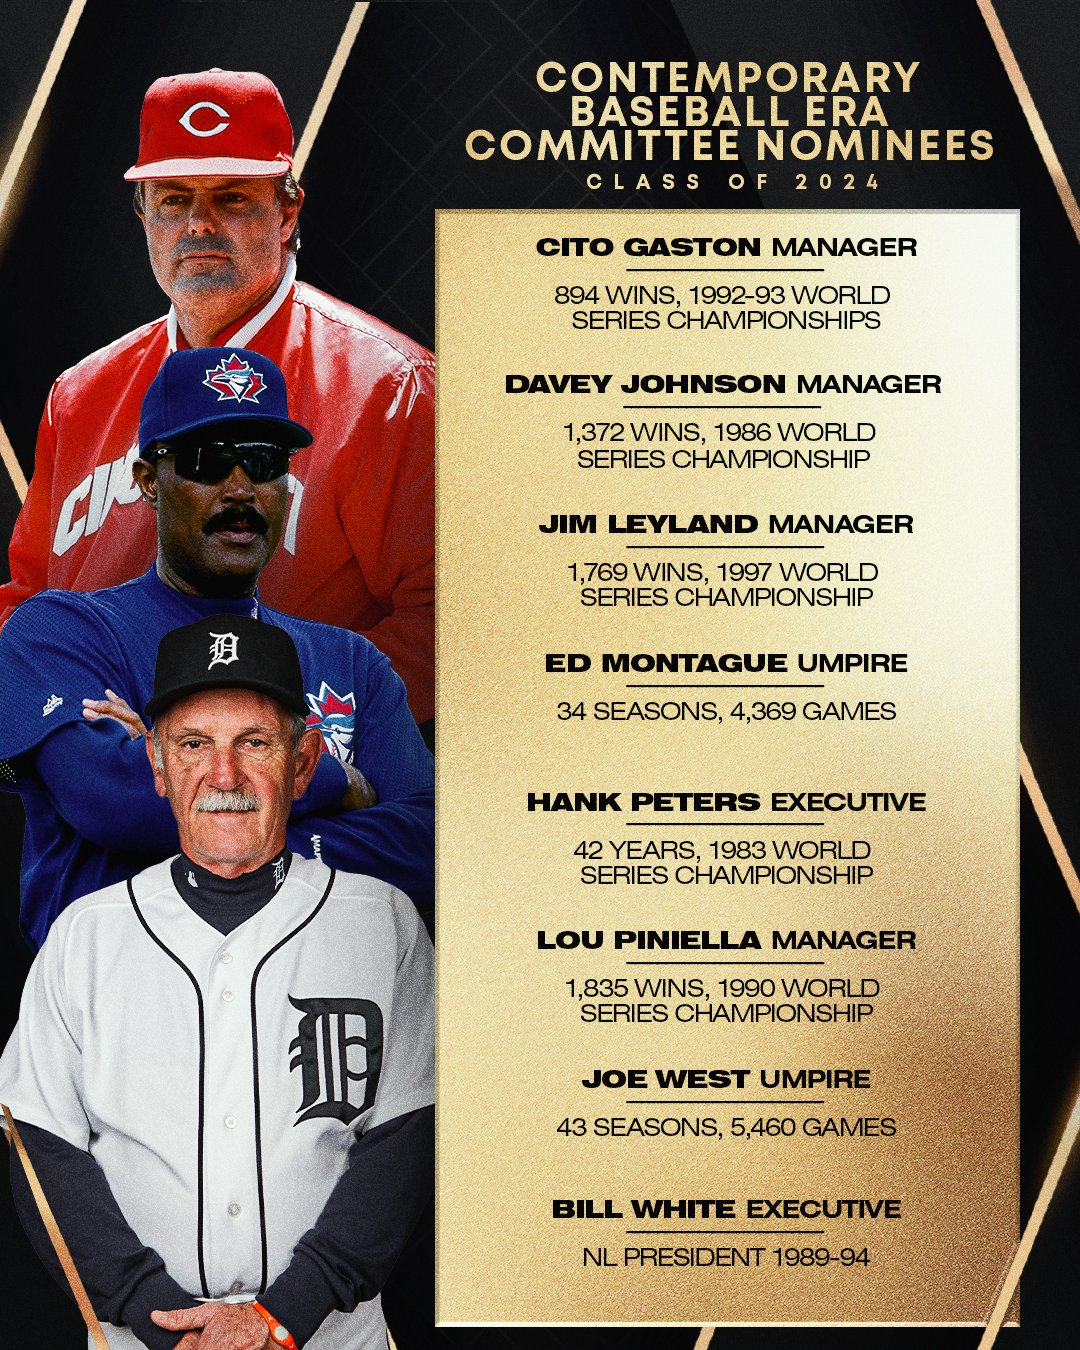 Do the right thing Contemporary Baseball Era committee, and vote